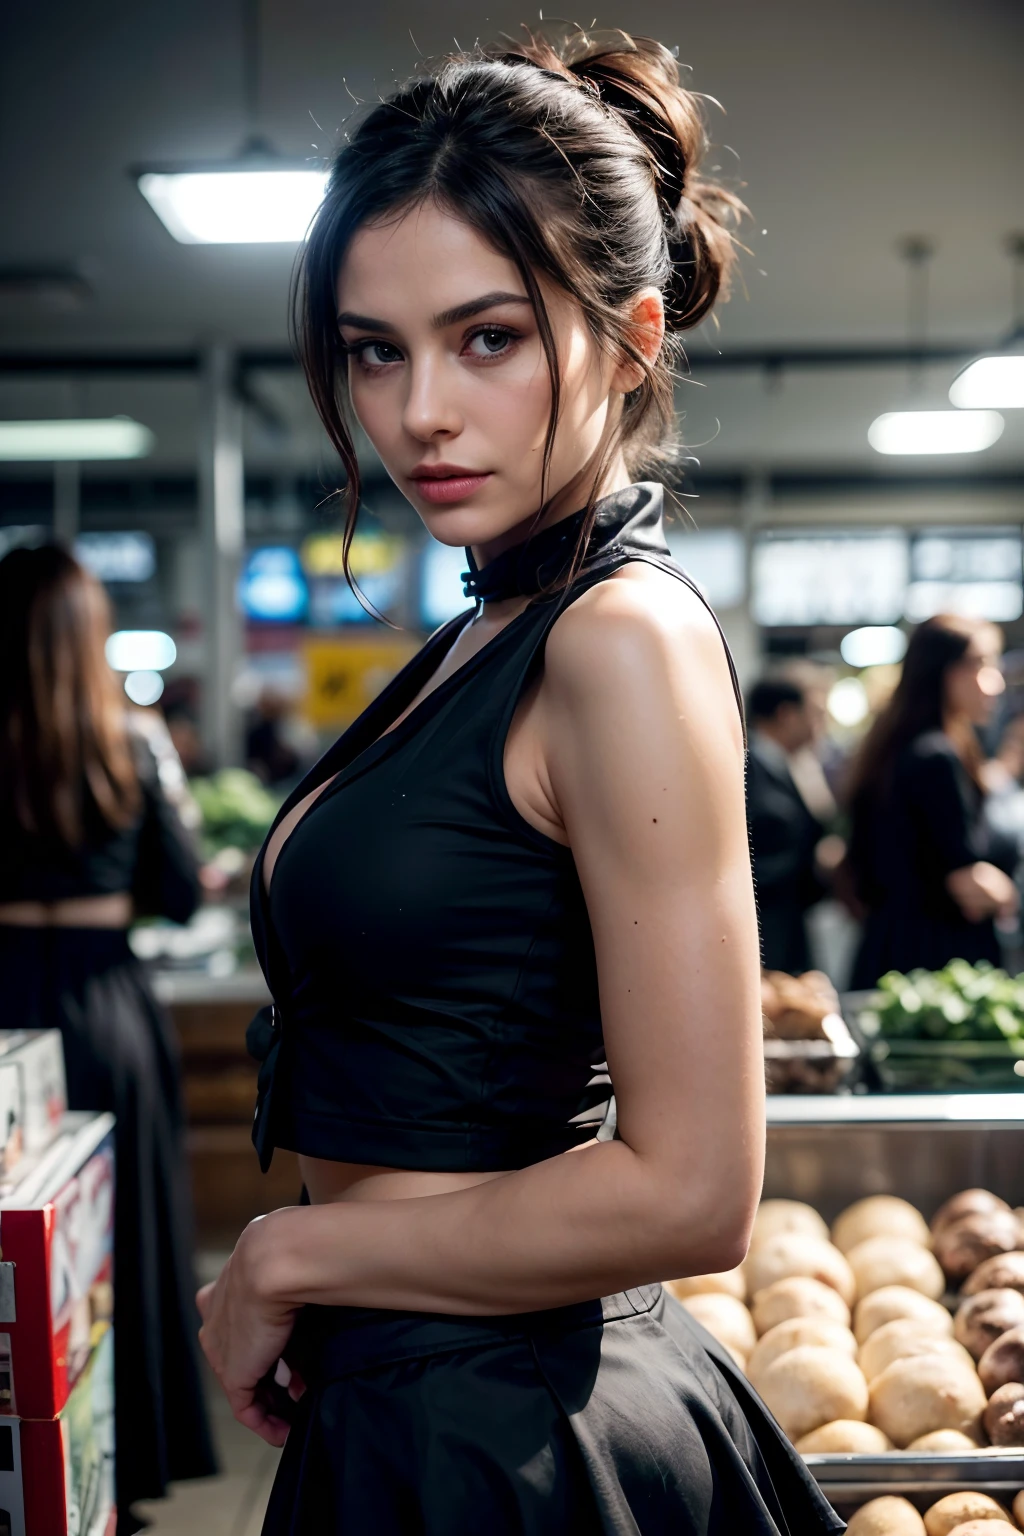 raw photo of a line of 5 or 6 people at store, everyone in line faces forward, (except one woman:1.4, she turns to camera:1.3) , she is a gorgeous, she's looking at us nobody else is looking in our direction,(interior of grocery store, variety of people in line:1.3)), everyone wears business outfits,), interior of florescent lit store, (filled with food packaging), only one looks at us, realistic photo, (40% of photo is black in drawing:1.4), she's has an (eye contact:0.3) skill , (she wears black tight skirt with red blazer, jewelry) and is intensely looking at camera, (flirty look:0.9) beautiful face, slight smile, intense presence, masterpiece, obsessively detailed store details, cozy relaxed, catching us, beautiful hands, kind eyes, gorgeous, incredible details, ((high contrast)), (deep, darkest shadows), (shadow details:1.0), ((taken using Leica camera, aperture: f/2.3)) , hyper-realistic skin, pores, scar, mole, (she has dark hair pulled away from face, tidy updo), smokey eye makeup,, her arms relaxed , relaxed moment, she's in dark with natural light glow, (romantic light:1.2), radiant skin, perfectly framed face, perfect relaxed hands, perfect fingers, (perfect portrait, incredible eyes:1.1), a work of art,sexy beautiful composition, golden ratio, inspiring, (highest quality fabric texture), every detail,Fine facial features – (Highest Quality) ,Leica camera film, High quality ○○ detailed – ○○ details ultra detailed(Ultra-fine ), Photorealistic, Extremely detailed(Extremely detailed) , (highest detail image, lens flare, realistic)○○ res – ○○ resolution ultra high res(A high resolution),playful relaxed photos